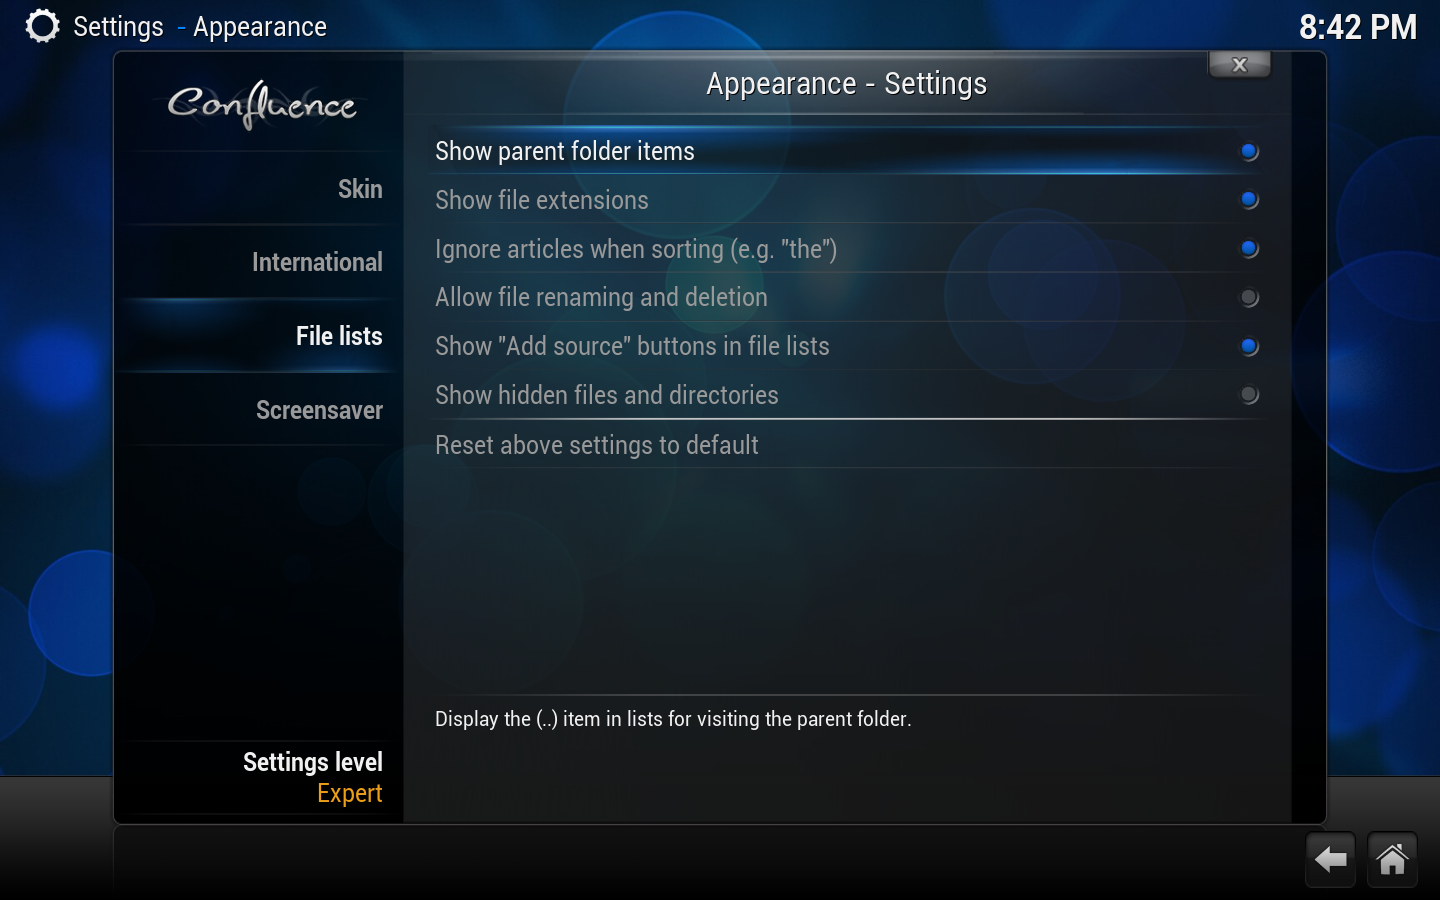 Settings.appearance.file lists.png